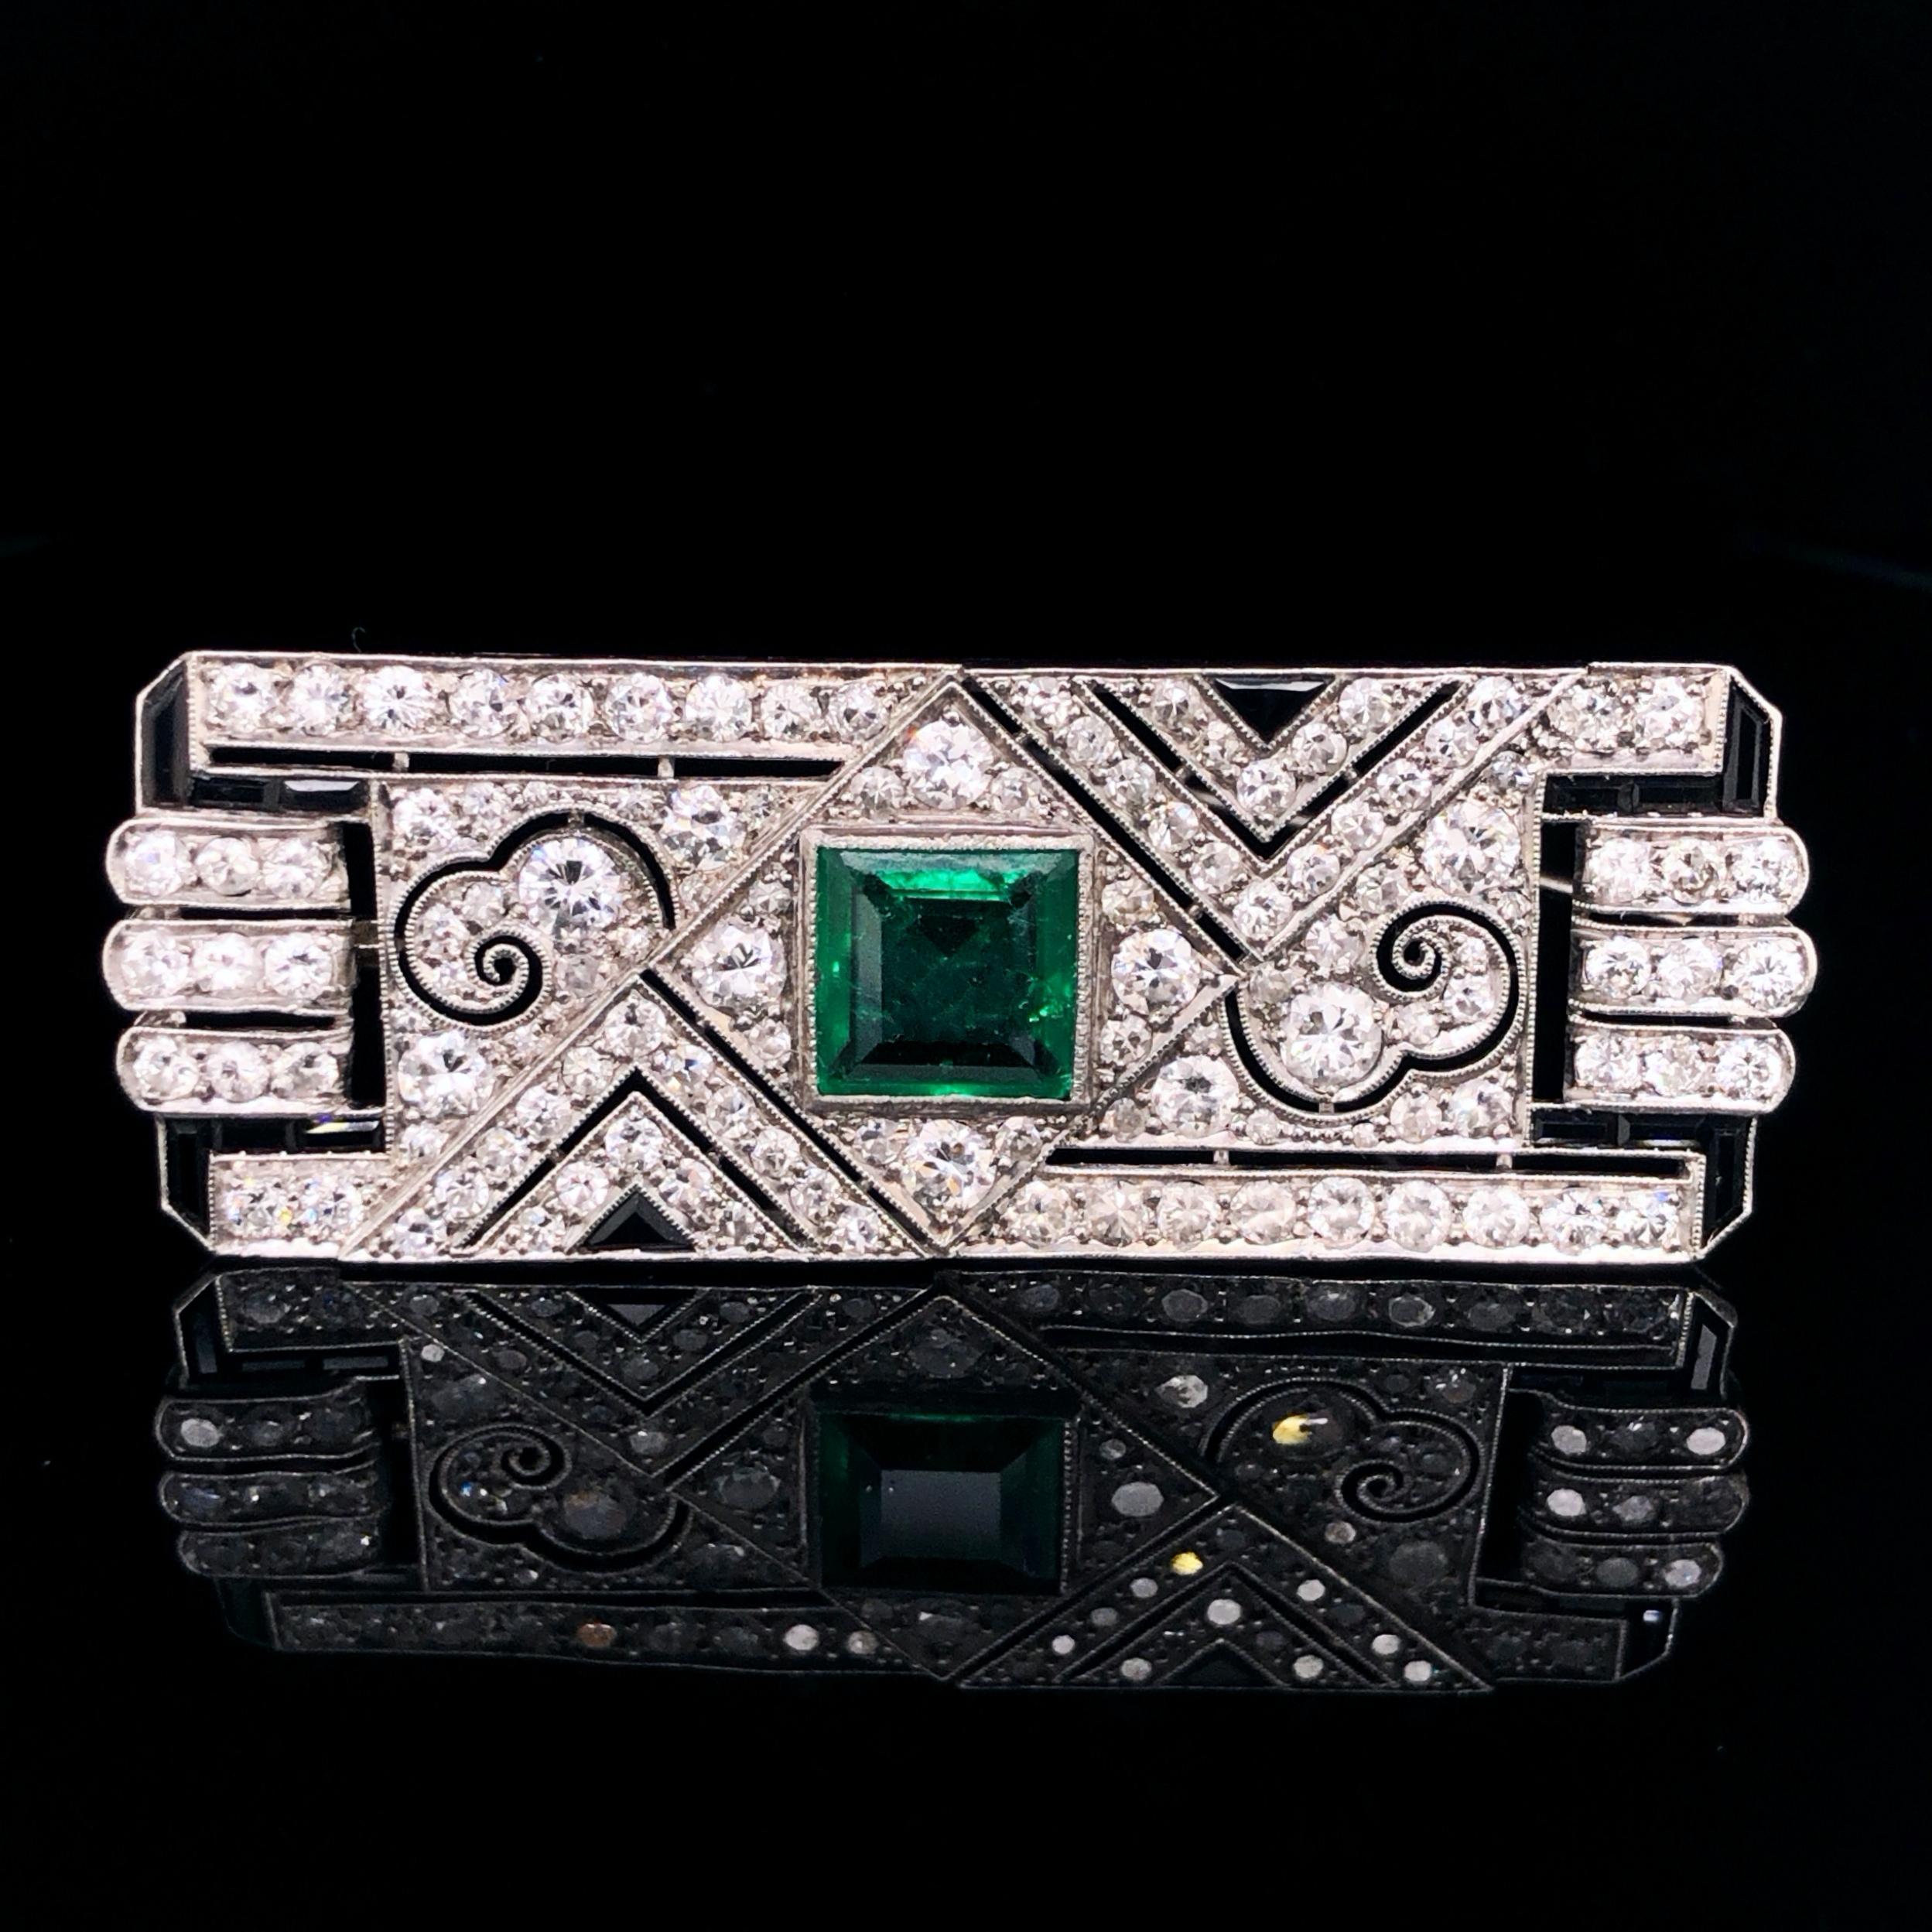 An emerald, diamond and onyx Art Deco brooch, ca. 1920, in platinum.

The facetted square emerald weighs 2.14 carats and is of Columbian origin. It has an old mine vivid green colour and crystal with fine jardin inclusions. The emerald is surround